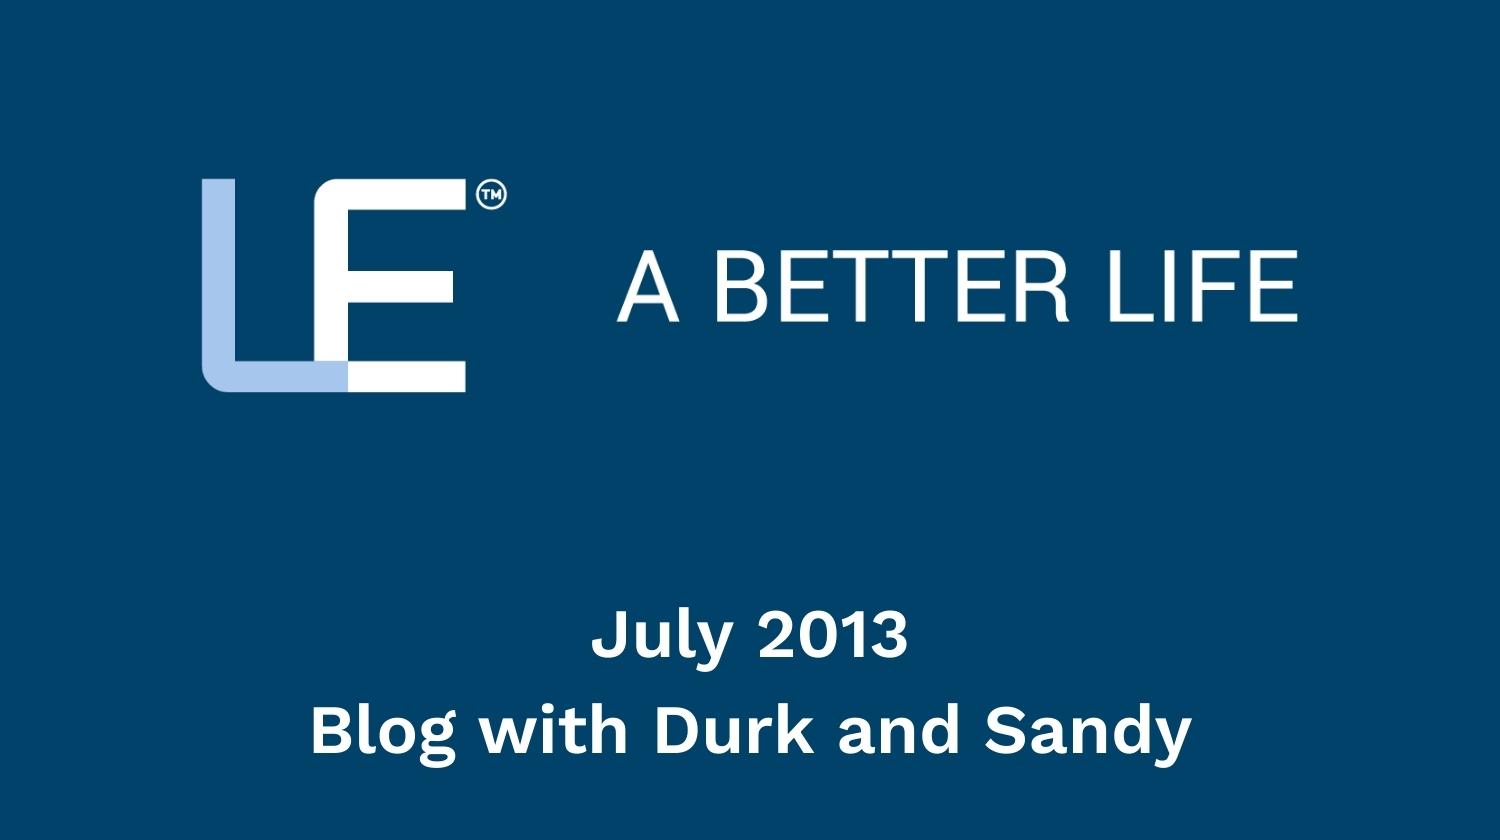 July 2013 Blog with Durk and Sandy